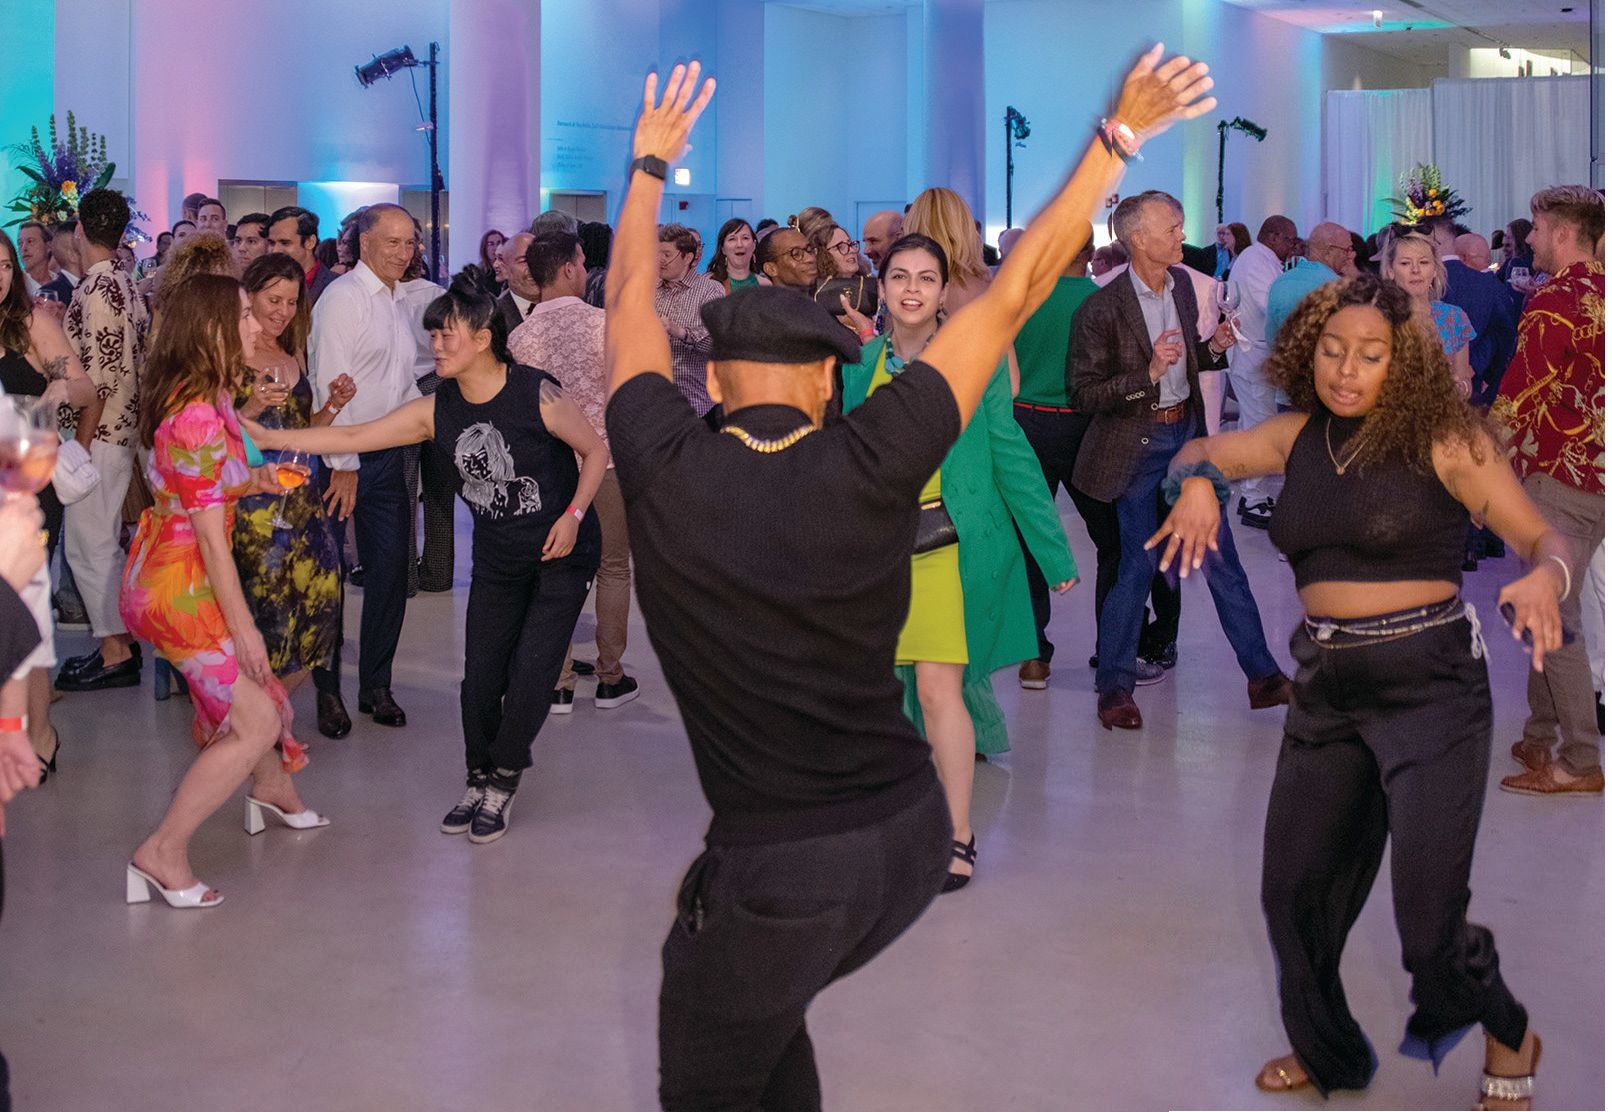 Inside Chicago Dancers United's 32nd Annual Dance For Life Fundraiser